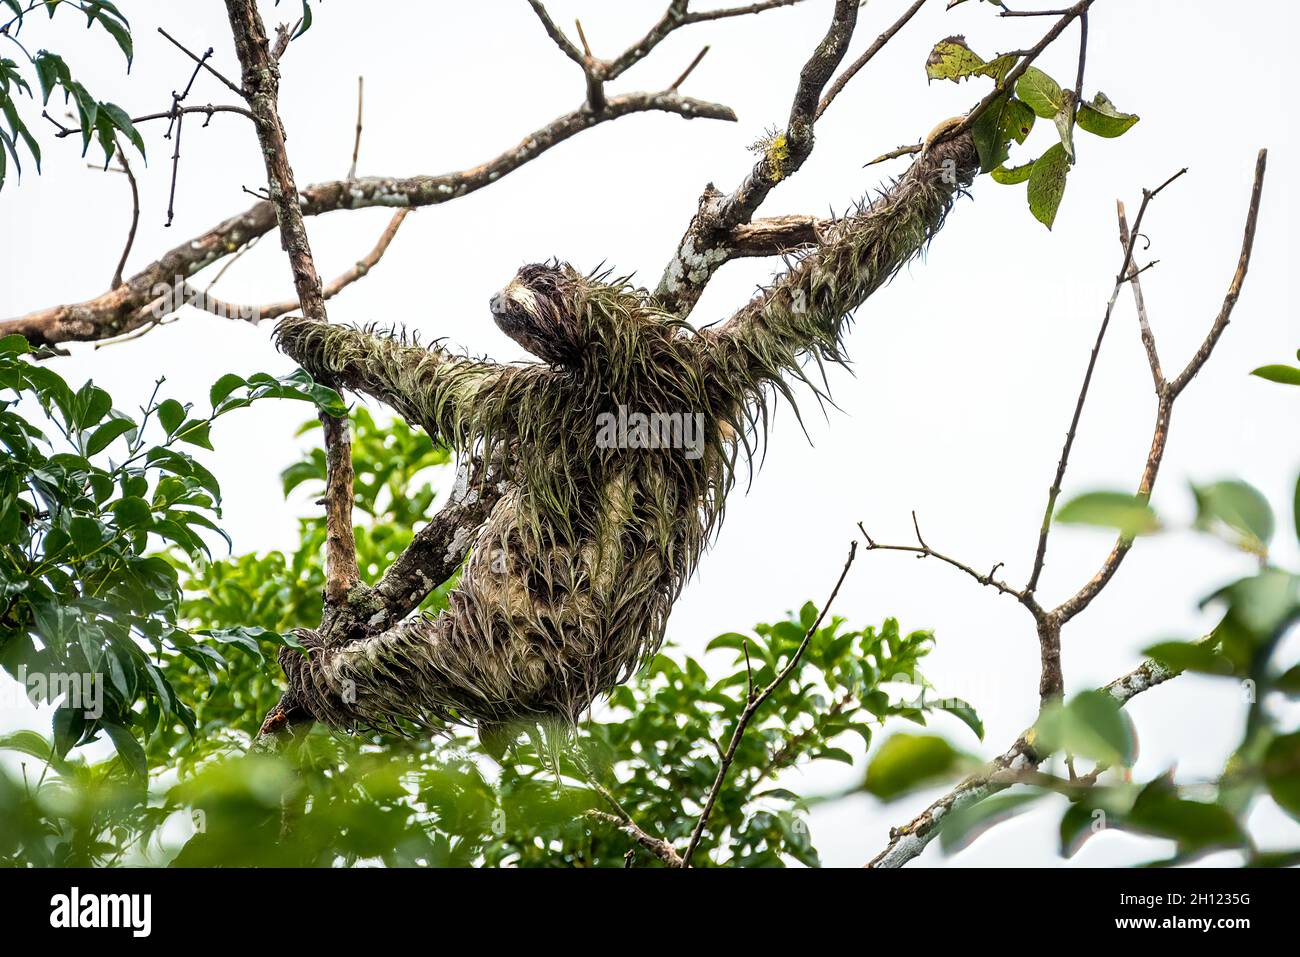 Brown-throated three-toed sloth got wet in a rain storm Stock Photo